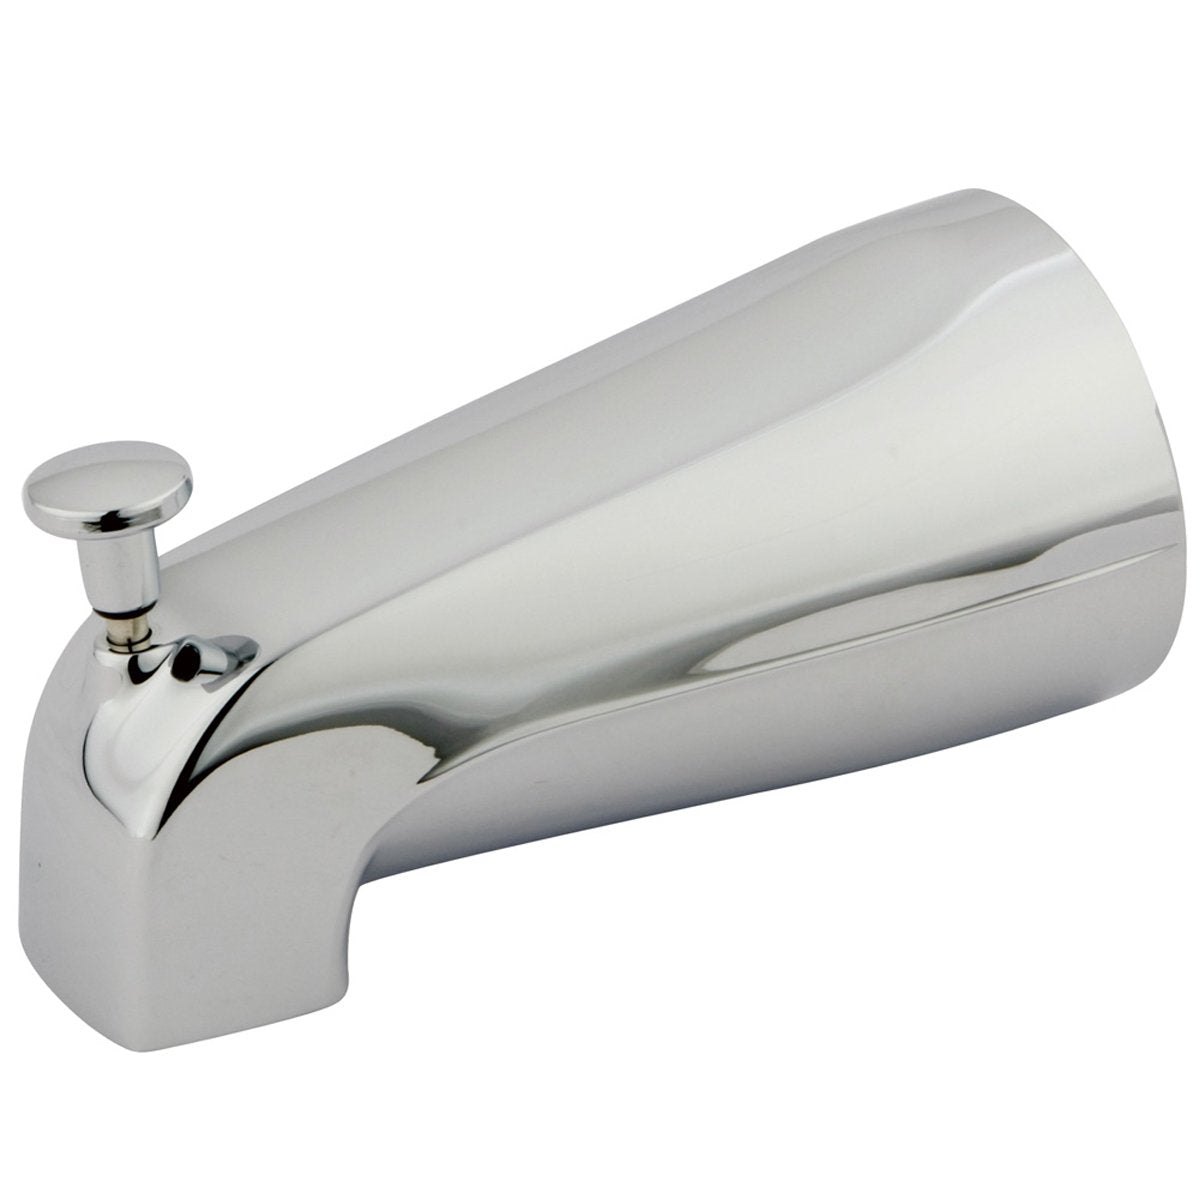 Kingston Brass Made to Match 5" Zinc Diverter Tub Spout-Bathroom Accessories-Free Shipping-Directsinks.